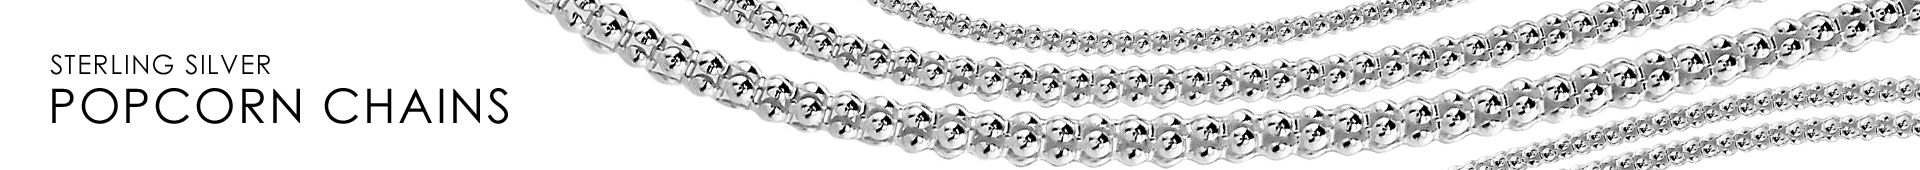 Sterling Silver Popcorn Chain Link Horizontal Banner